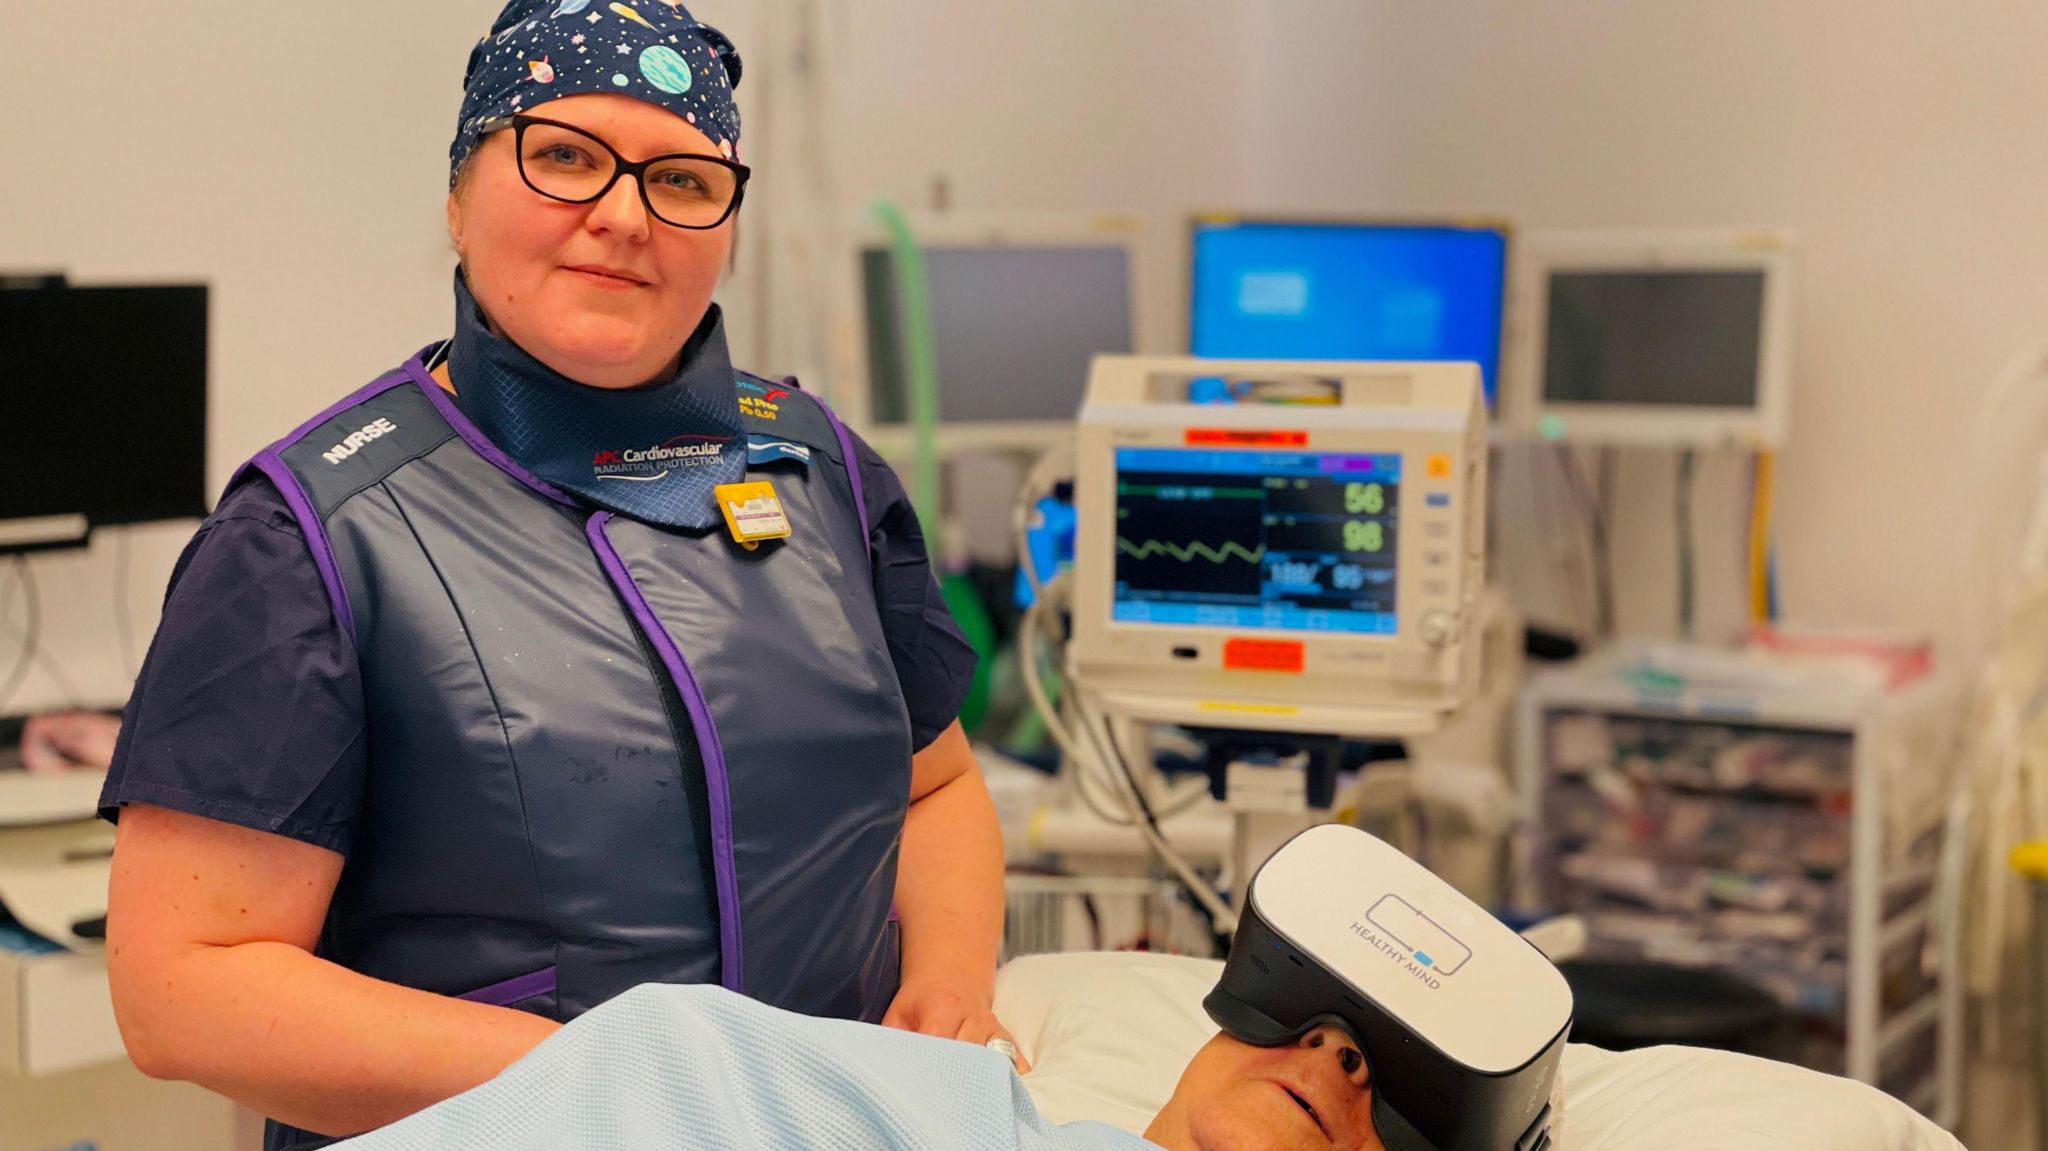 A hospital patient wearing a VR headset before undergoing a minor operation